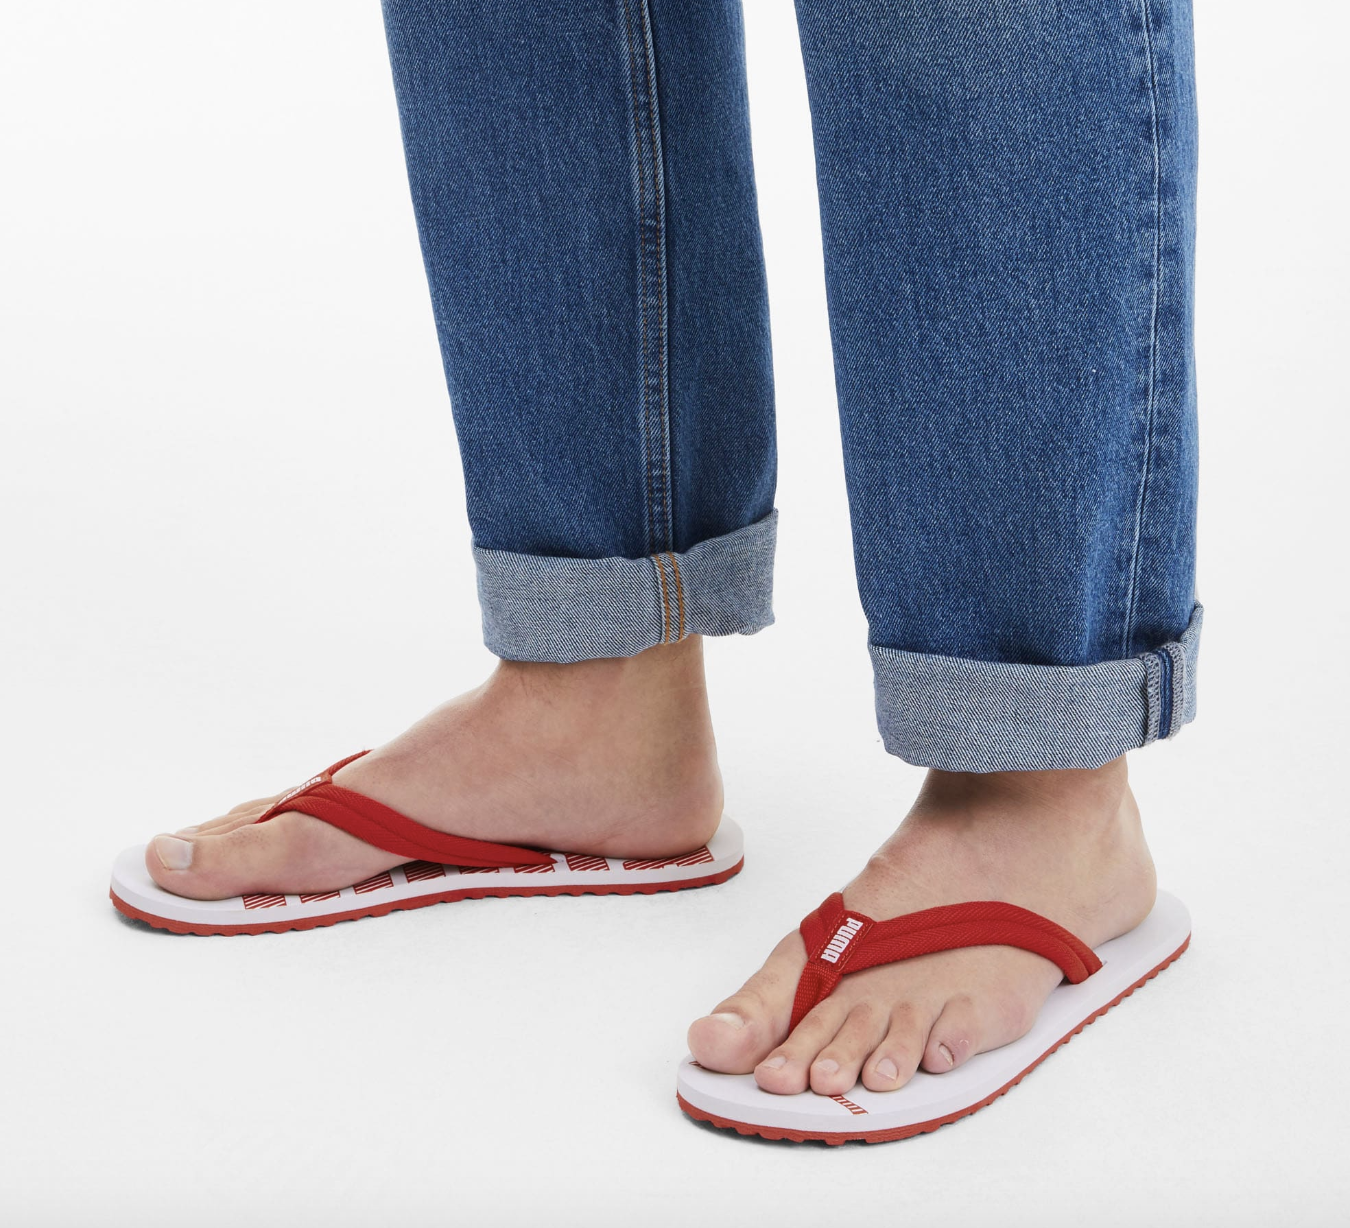 The sandals in red and white on feet